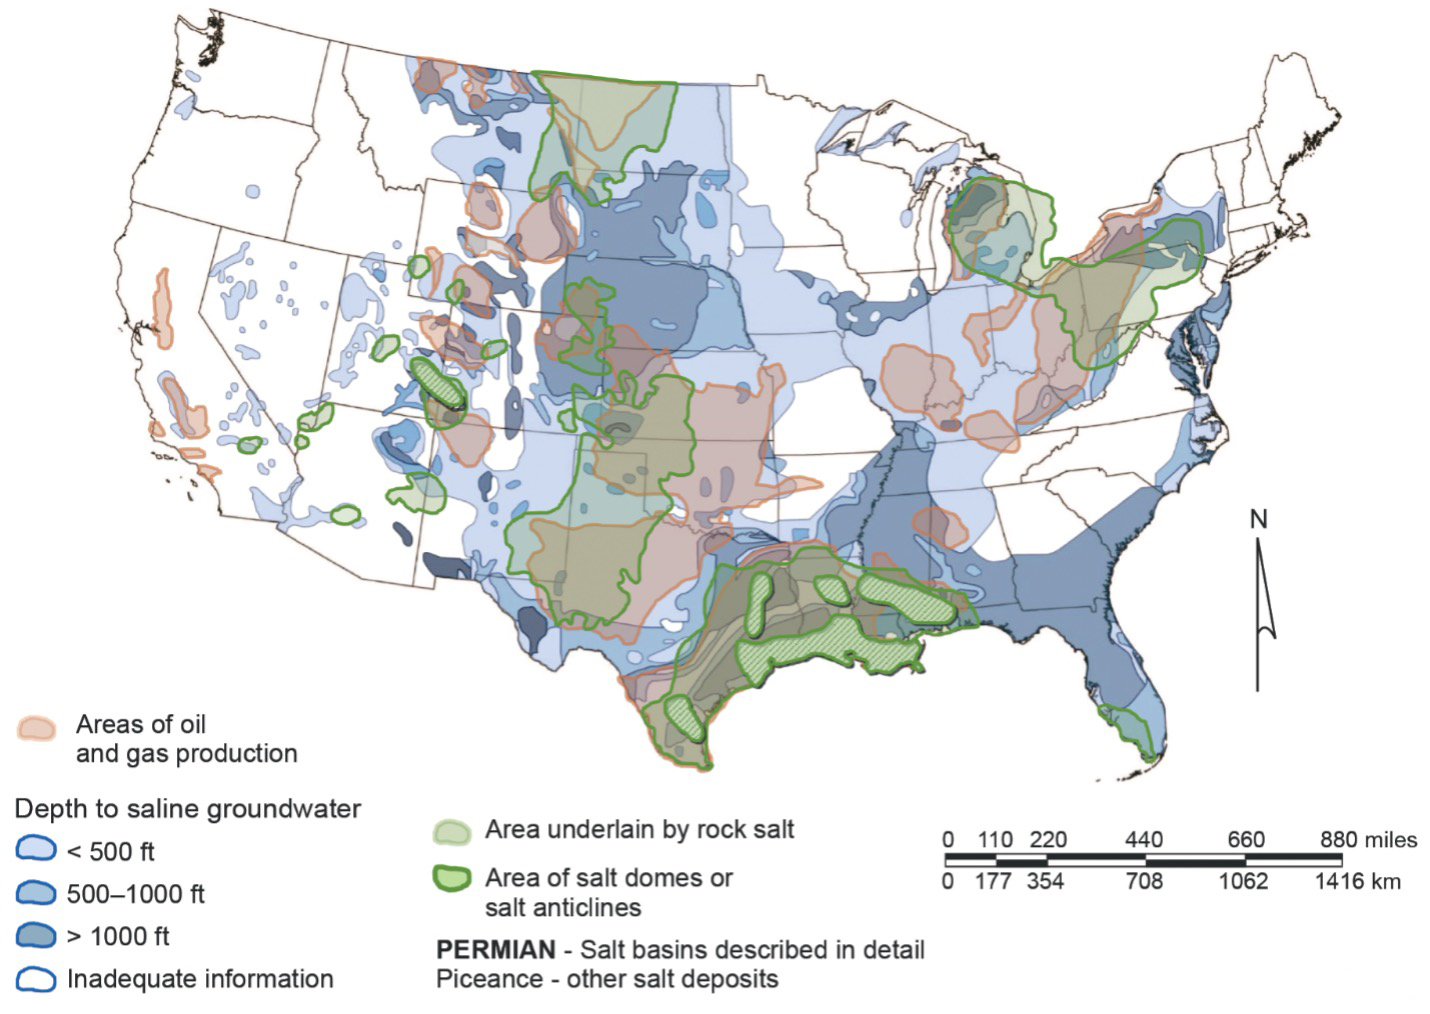 large-scale storage capacity of hydrogen gas across United States